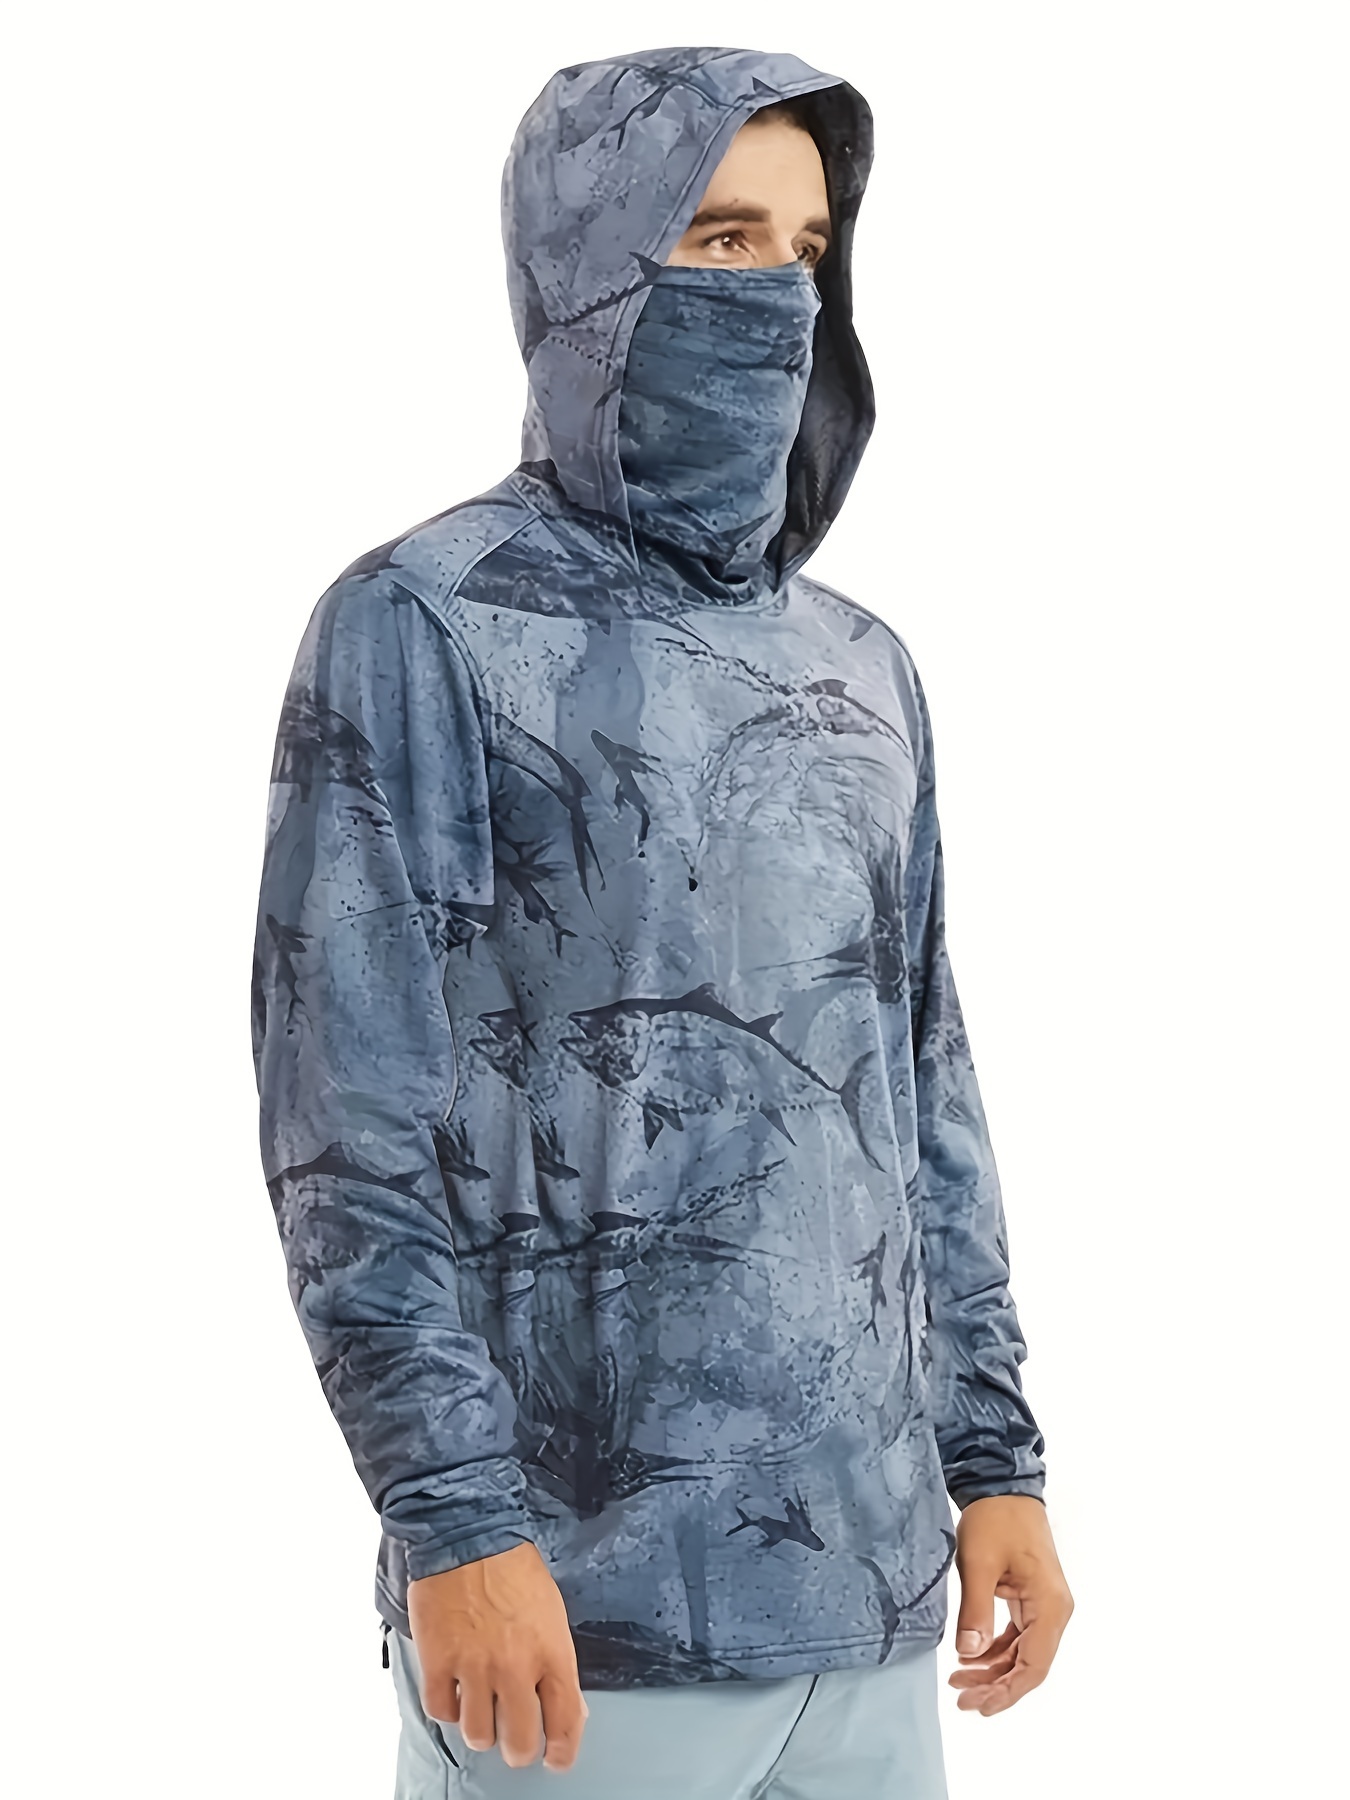 Men's UPF 50+ Sun Protection Hoodie With Mask, Long Sleeve Comfy Quick Dry  Tops For Men's Outdoor Fishing Activities